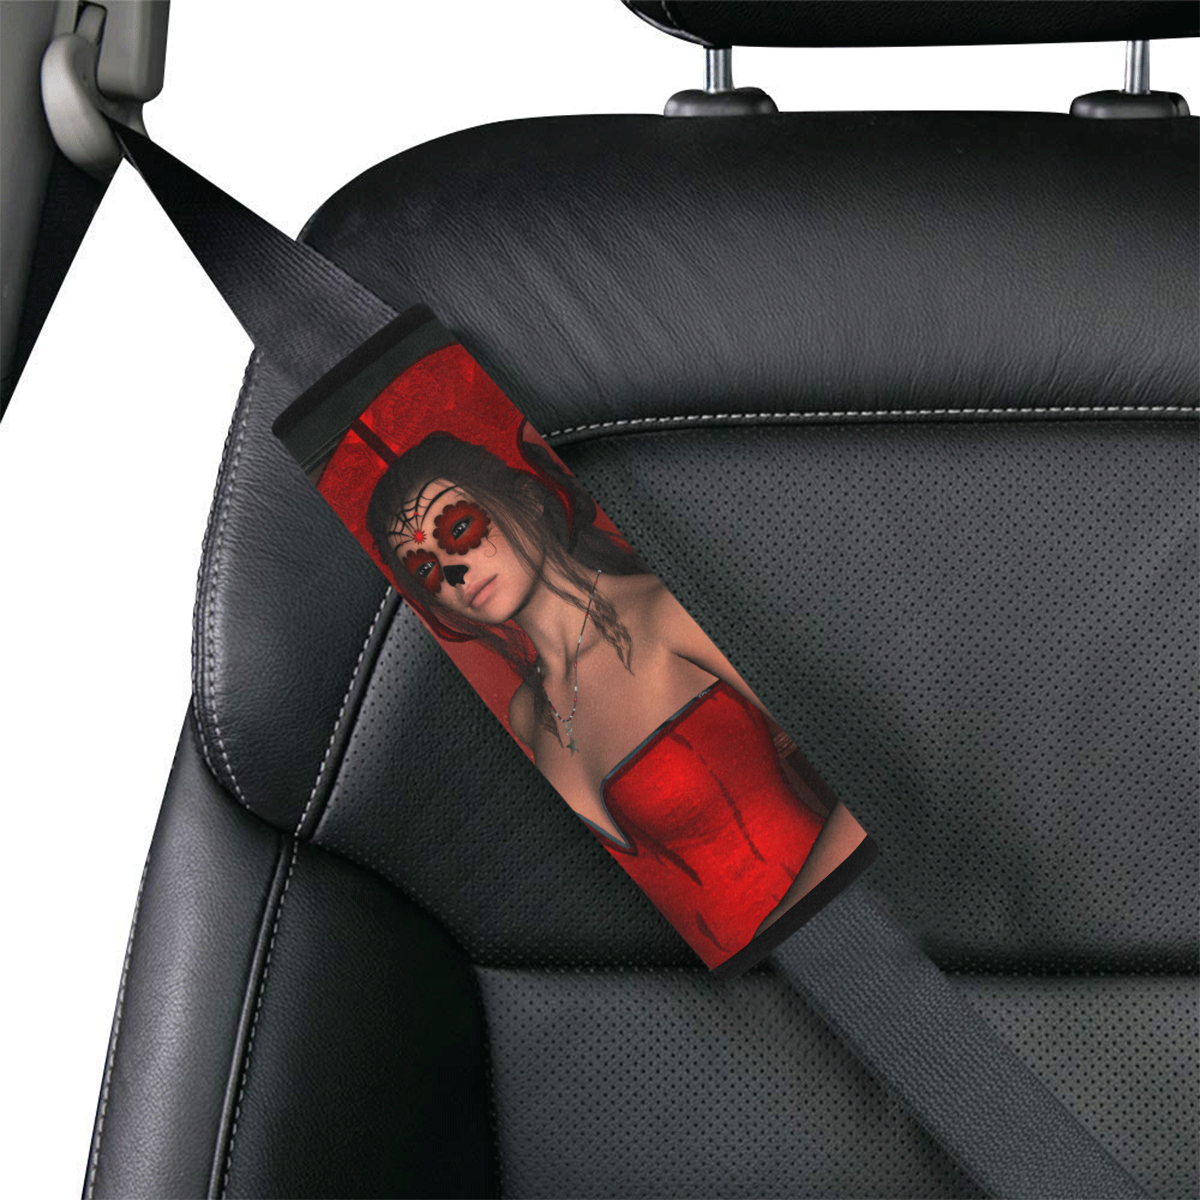 Awesome lady with sugar skull face Car Seat Belt Cover 7''x8.5''